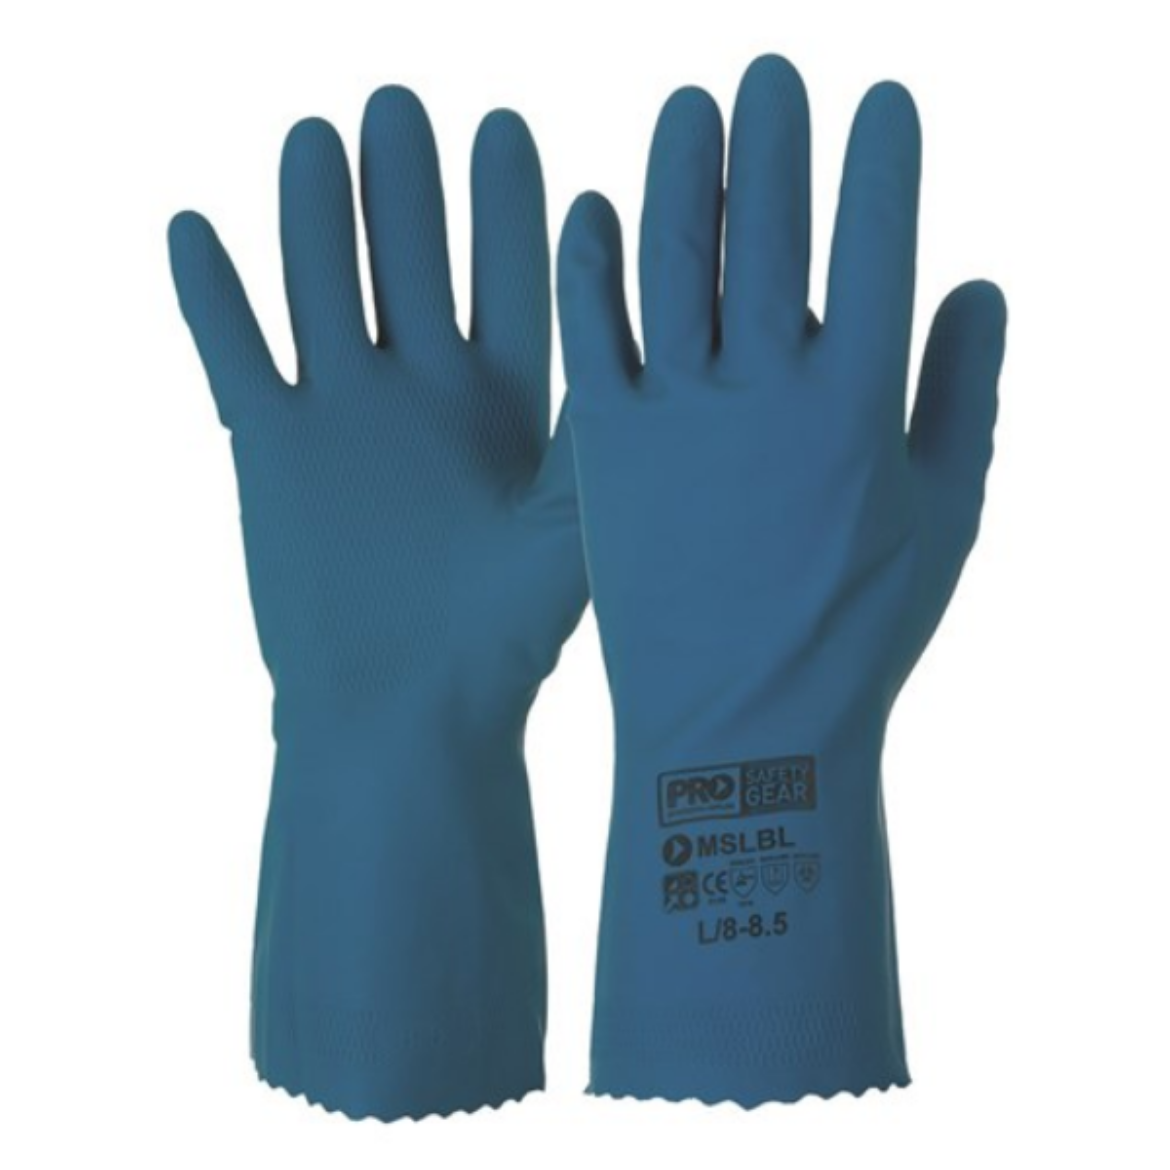 Picture of MSLB.SIZE - SILVERLINED LATEX RUBBER HOUSEHOLD GLOVES - BLUE. AVAILABLE IN SIZES M/7, L/8 & 2XL/10